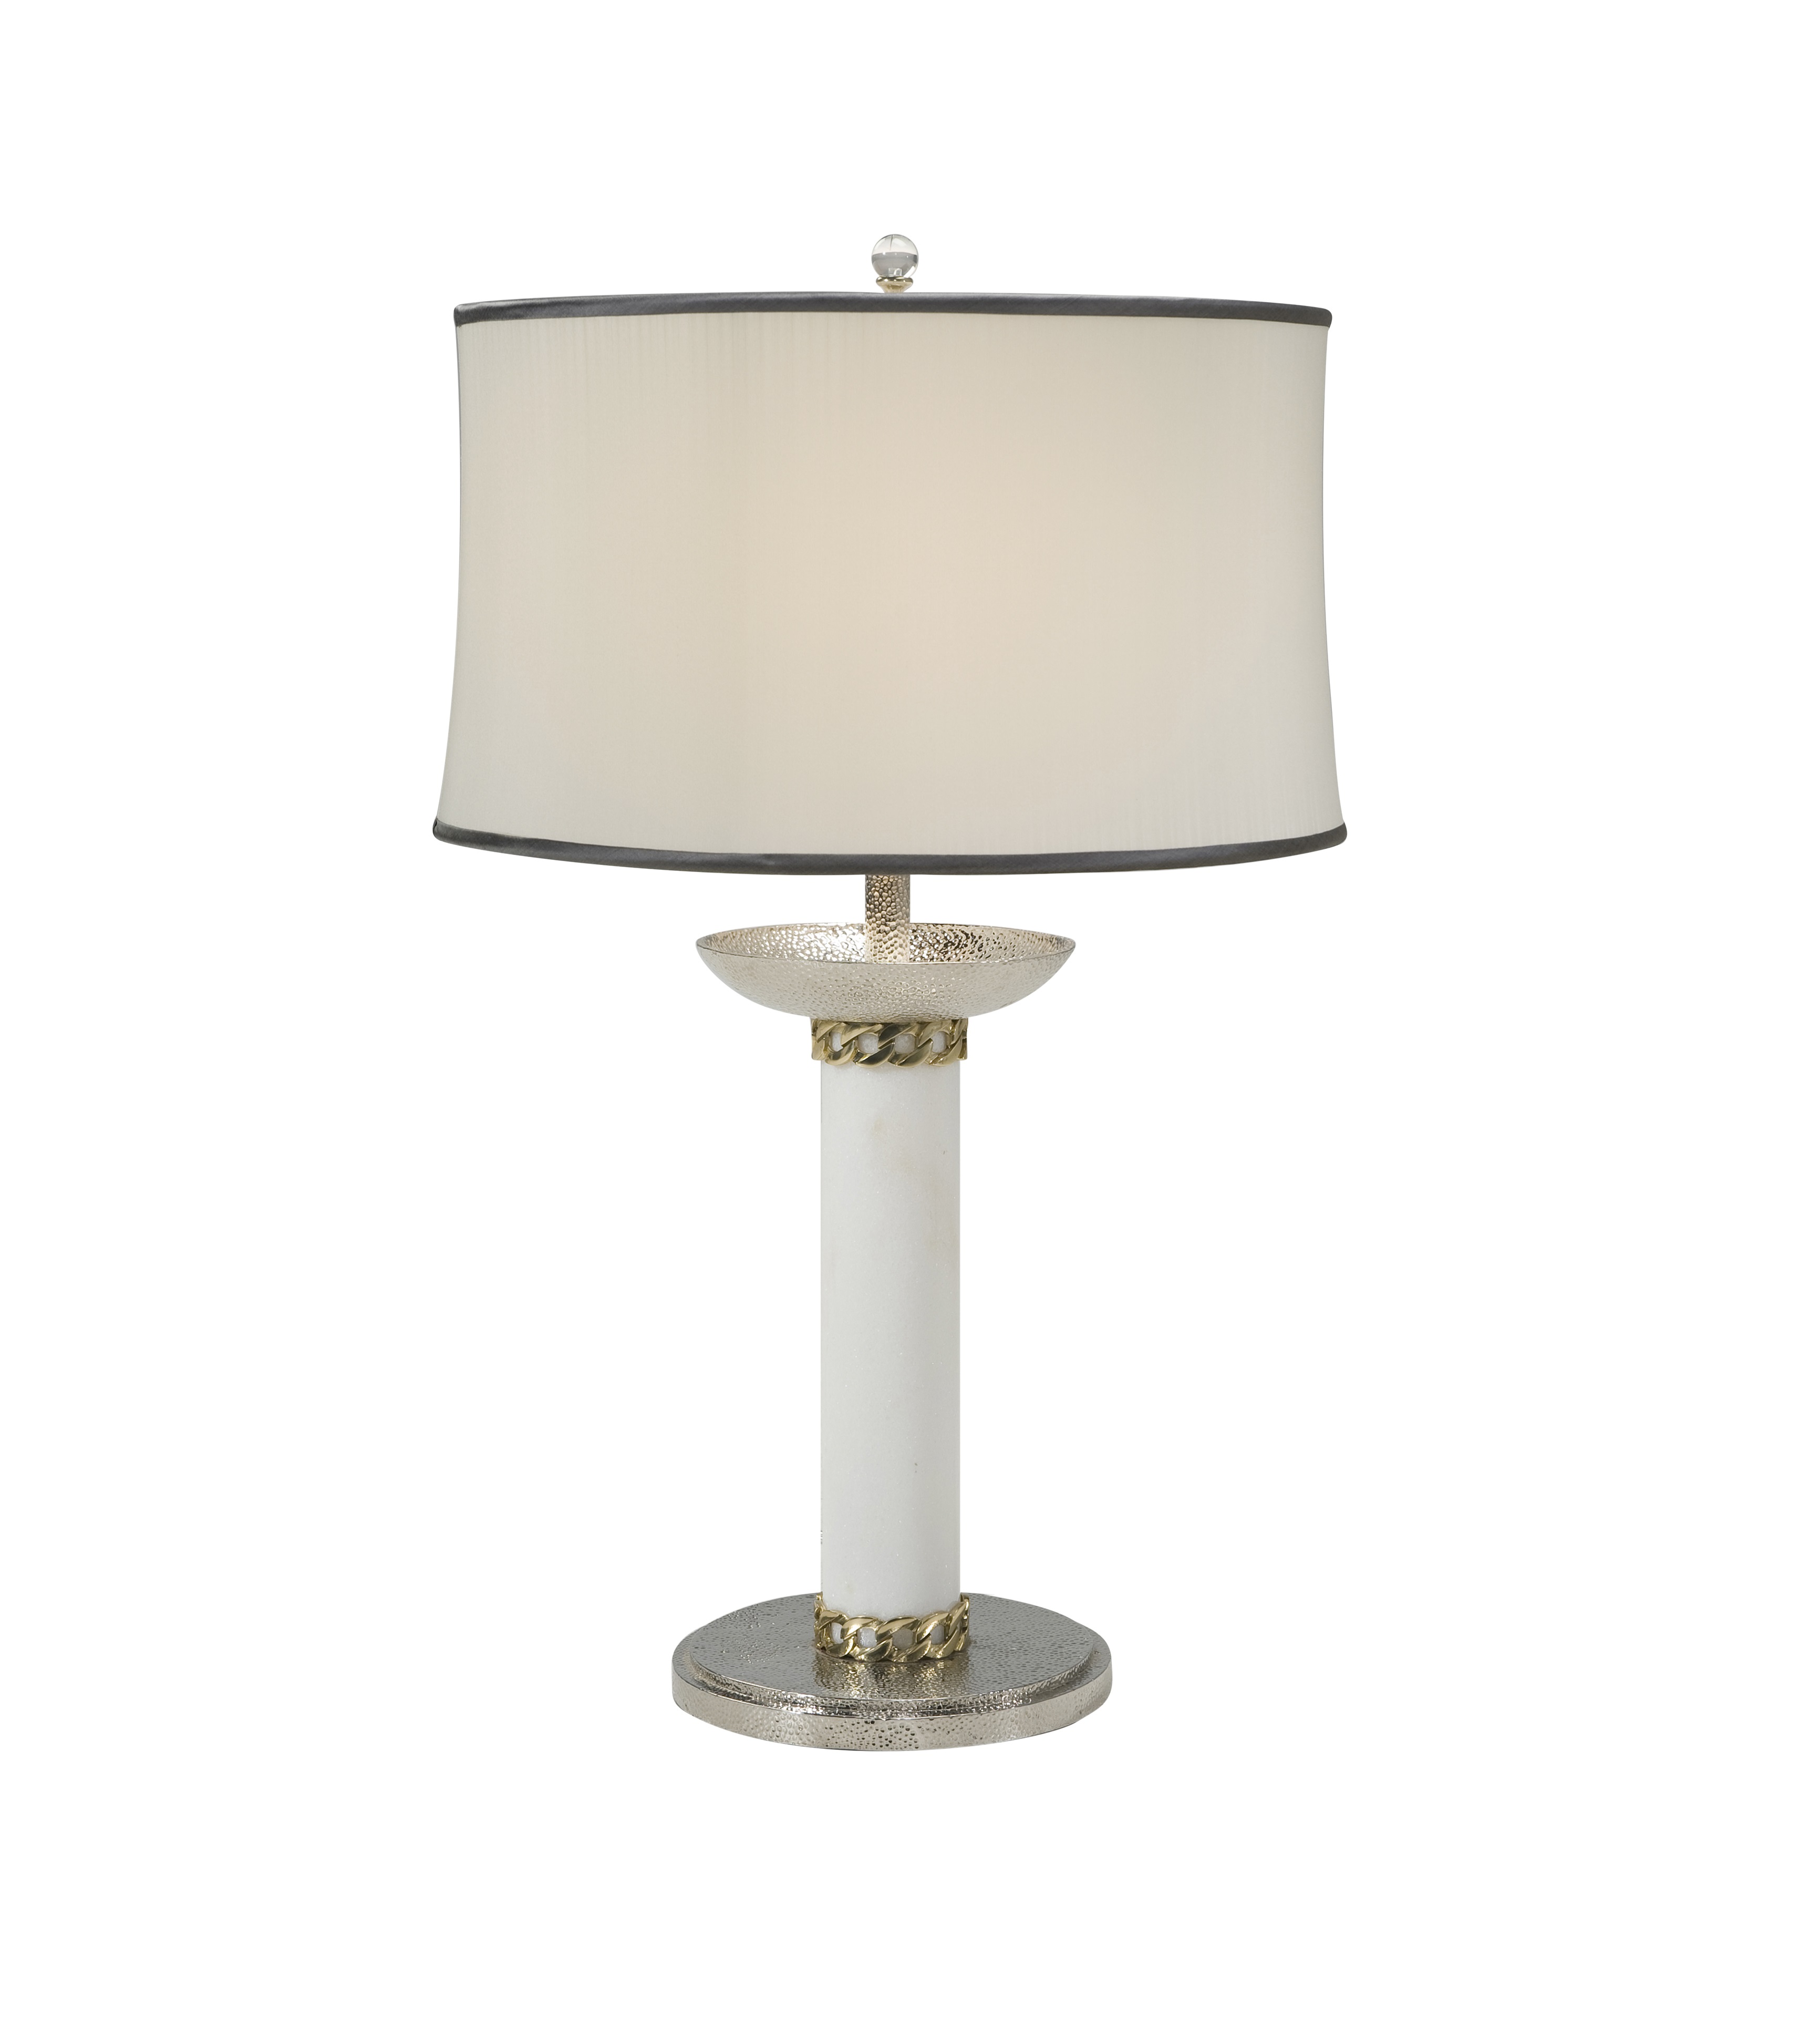 NICKEL PLATED BRASS BASE TABLE LAMP